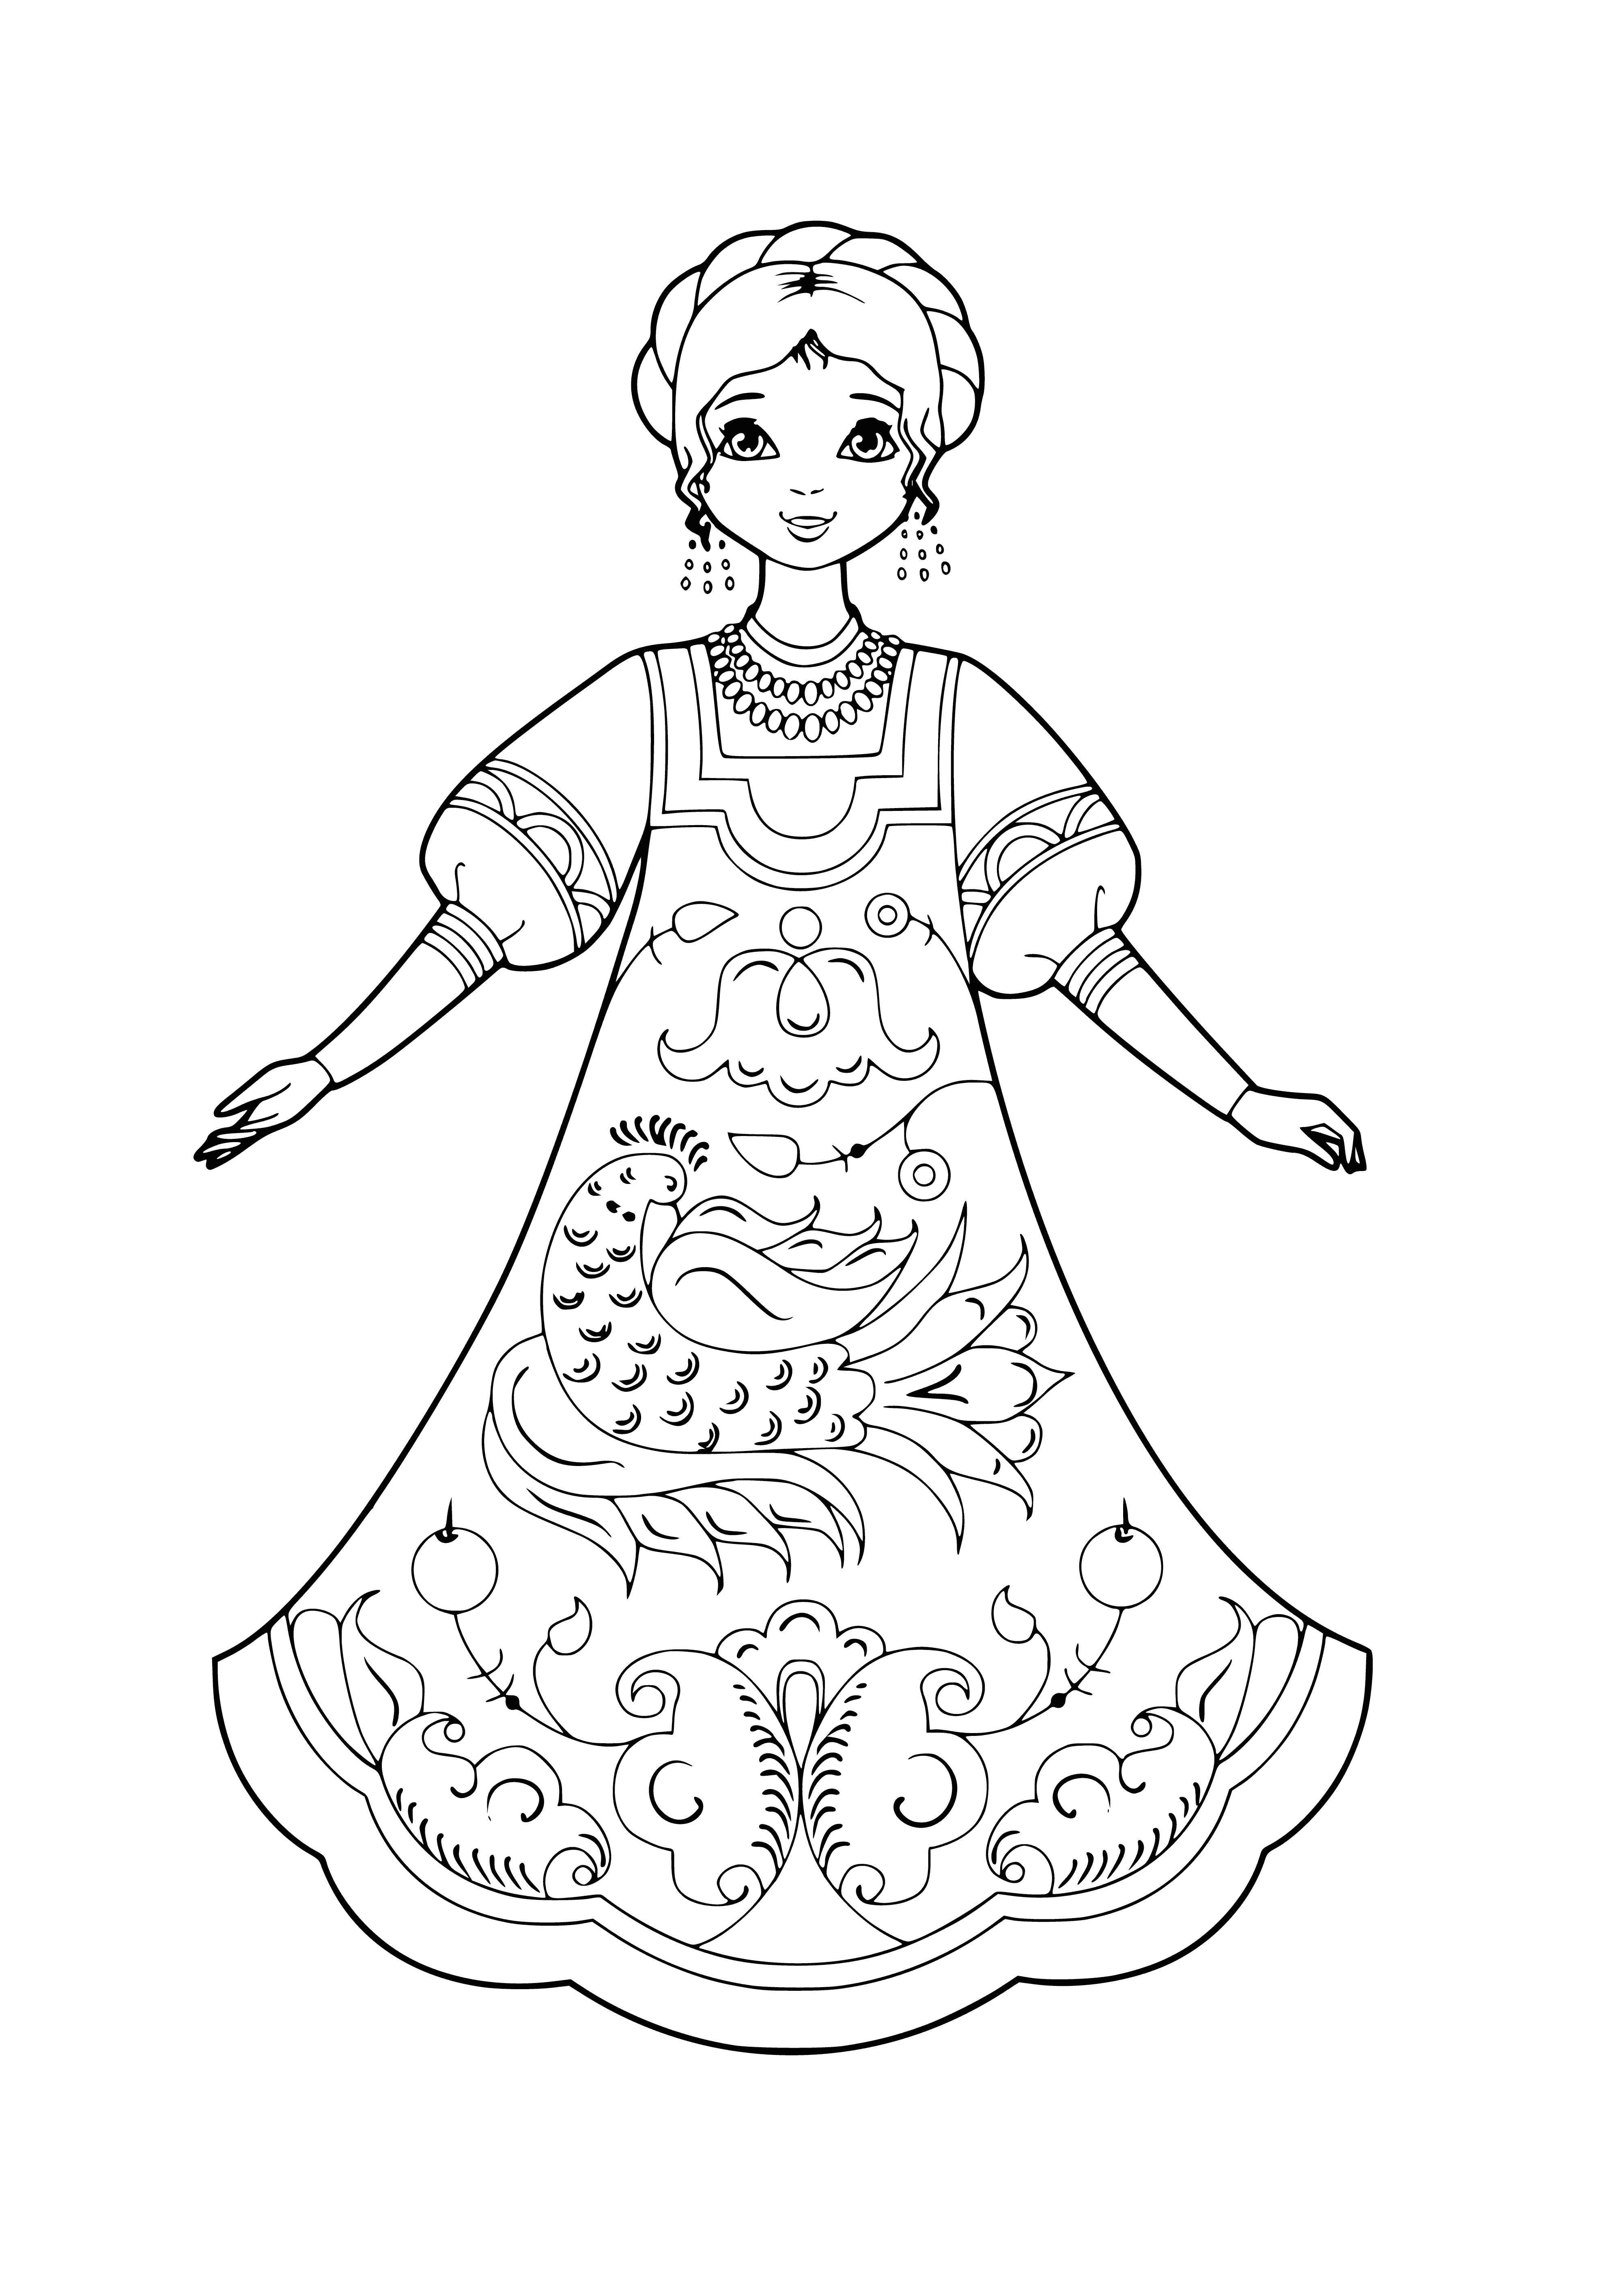 coloring page: Two Russian blondes with bright dresses, fur-trimmed shawls, and small dogs in their laps. Both have curled hair + delicate features (one with a necklace, one with a ribbon).